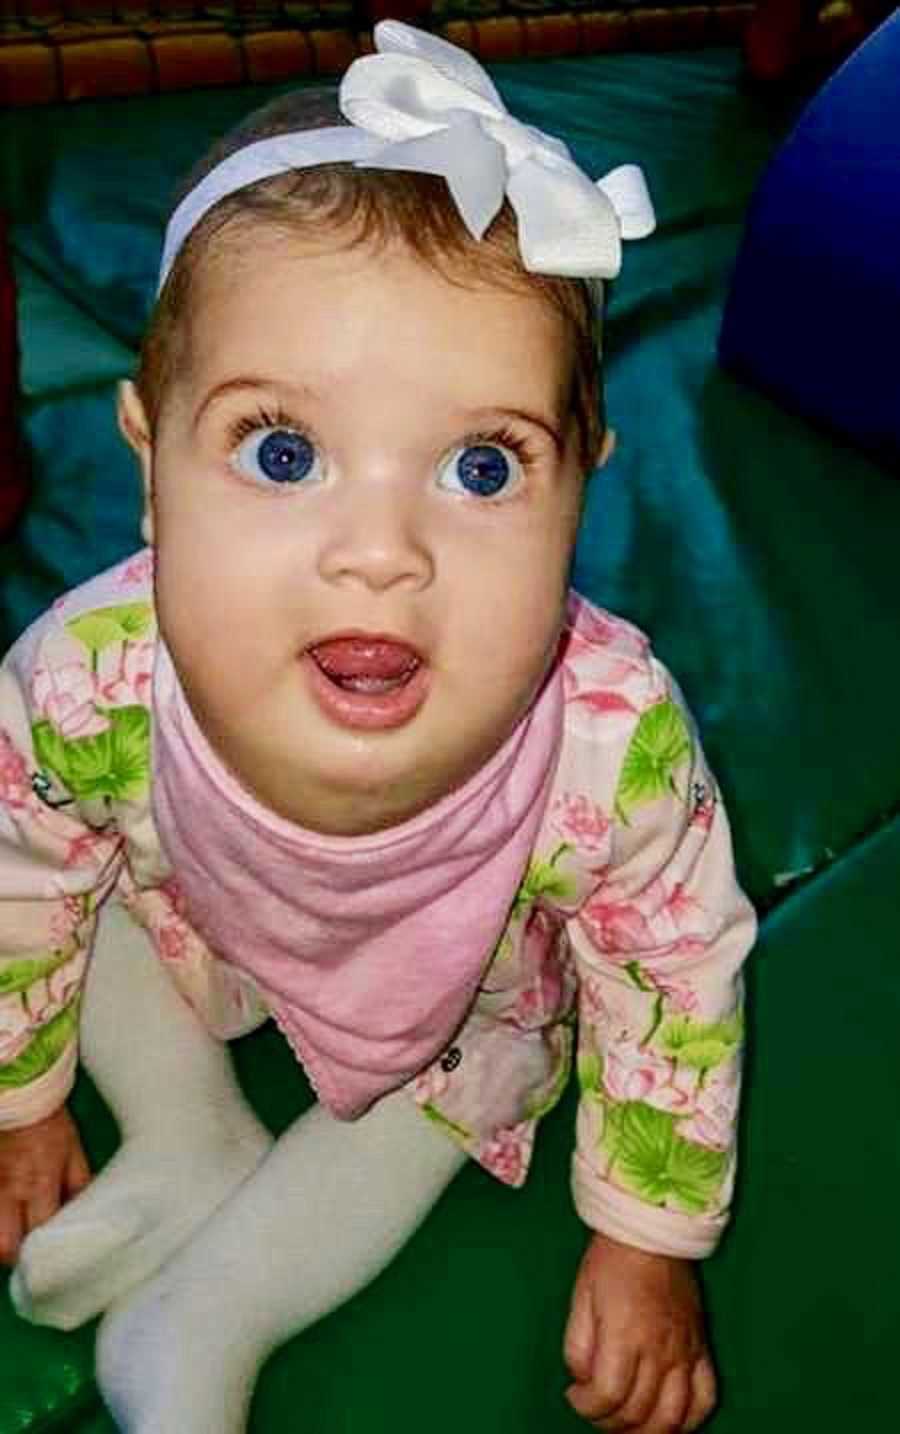 Baby with cystic hygroma sits on floor of home looking up with white bow on her head